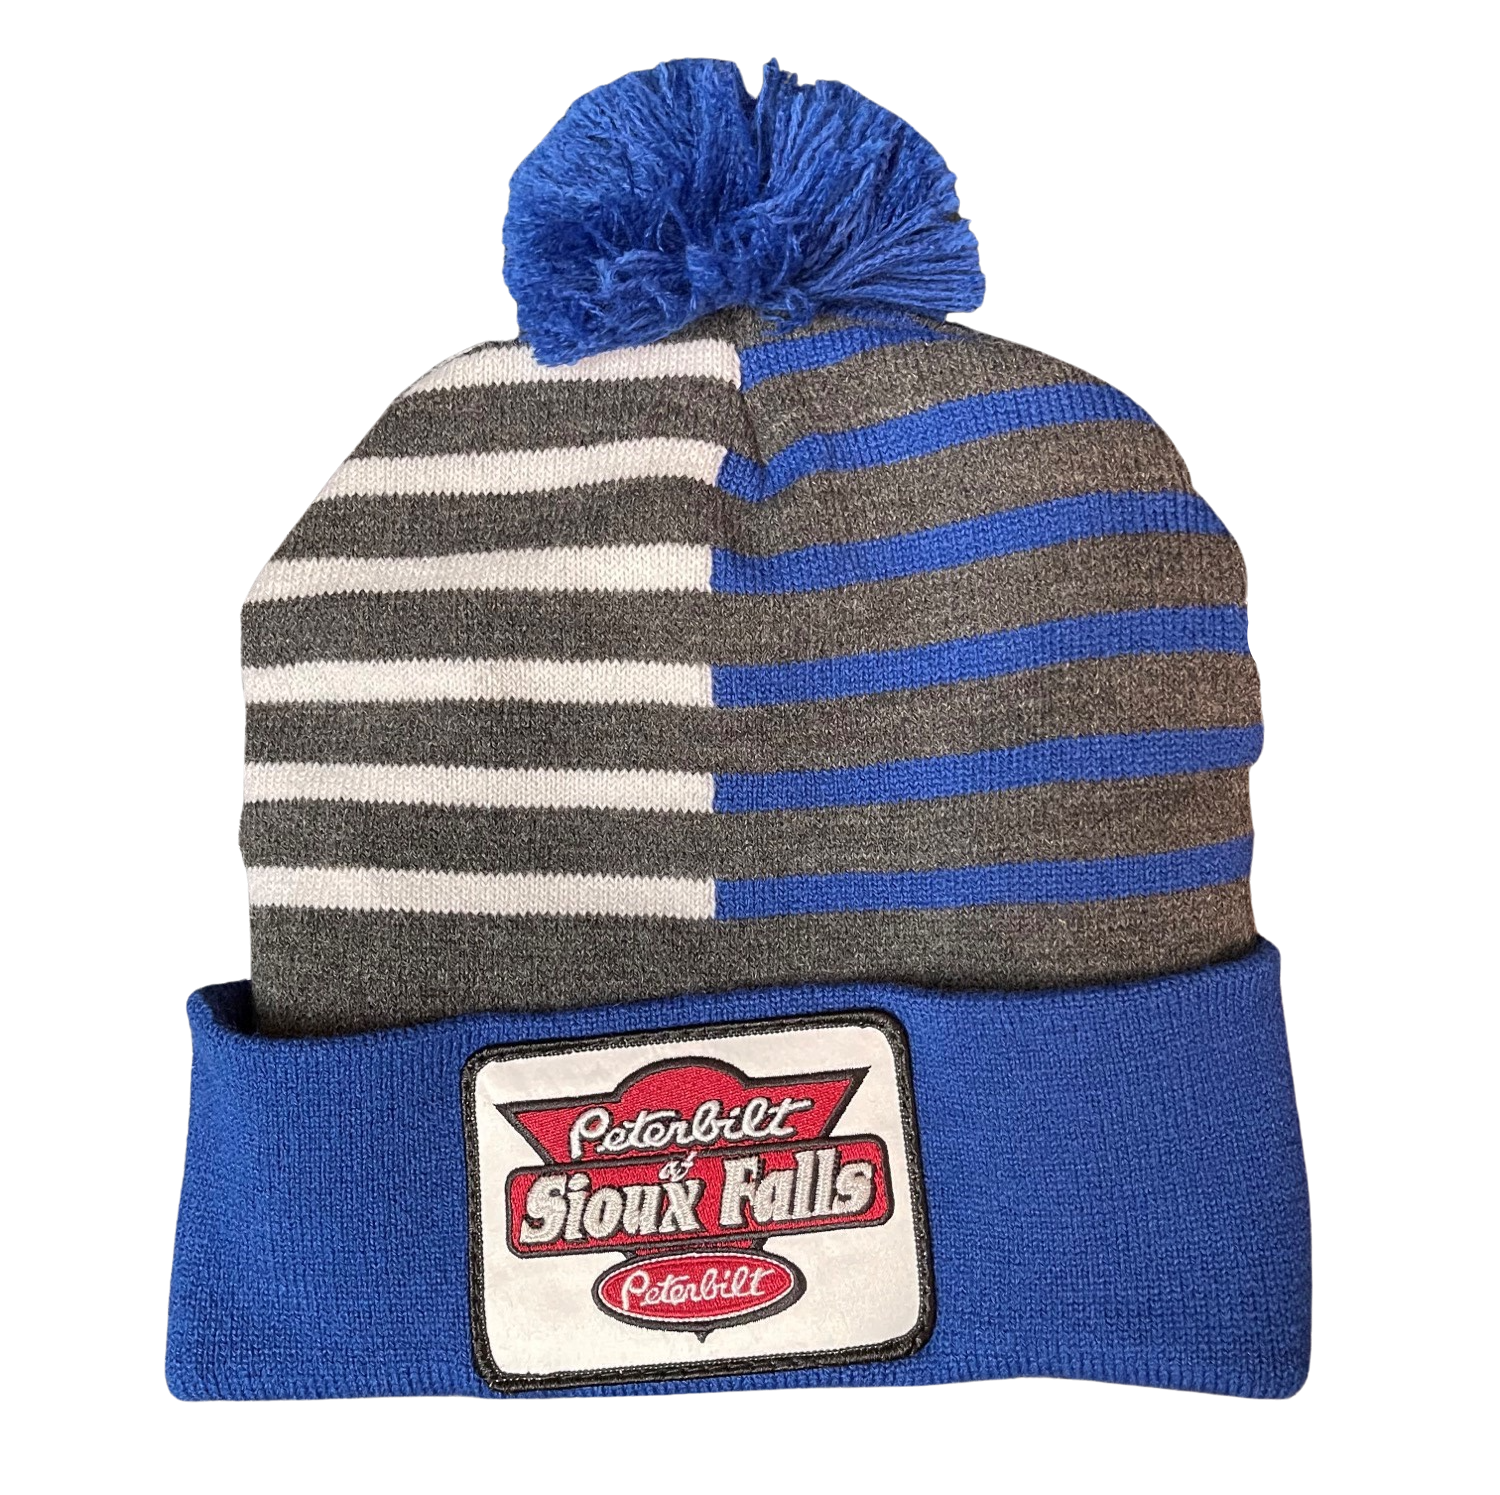 Blue, Gray, and White Stocking Hat